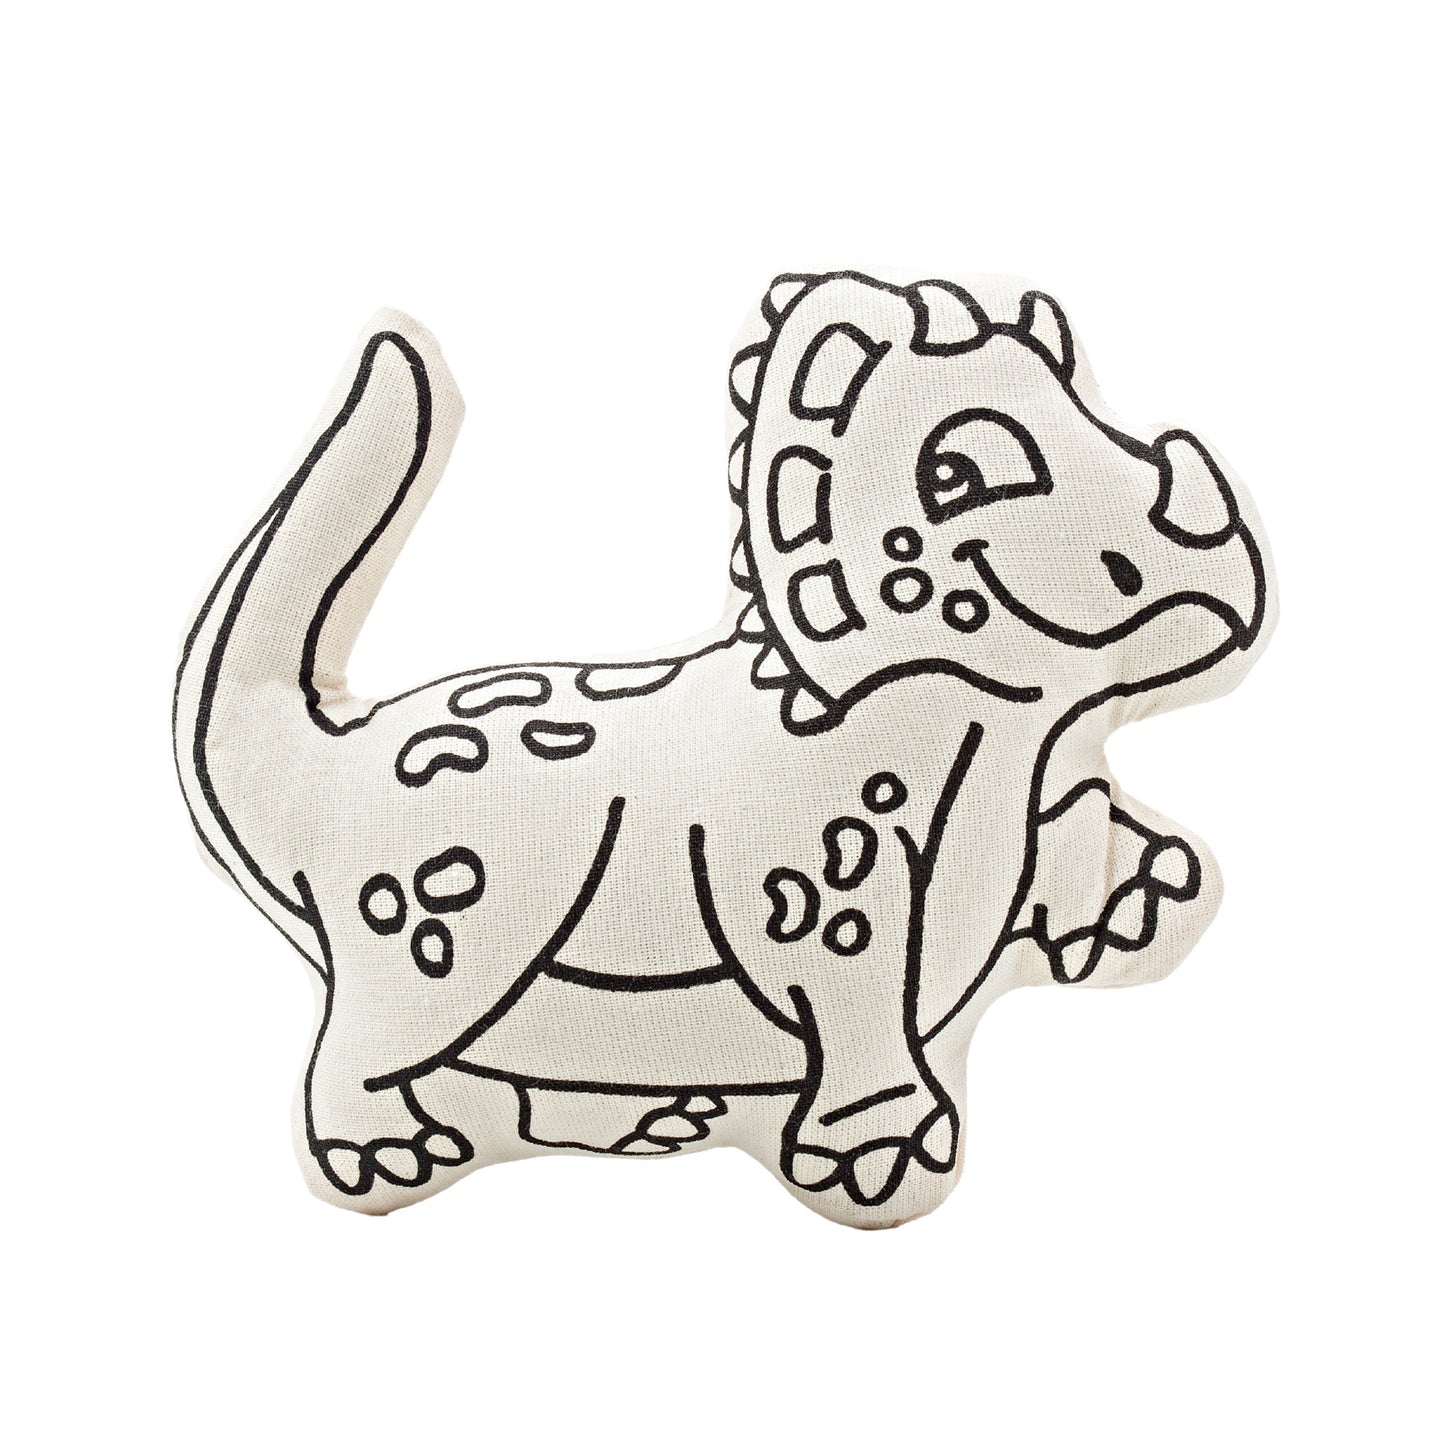 Kiboo Kids Jurassic Series: Triceratops Dinosaur for Coloring and Creative Play